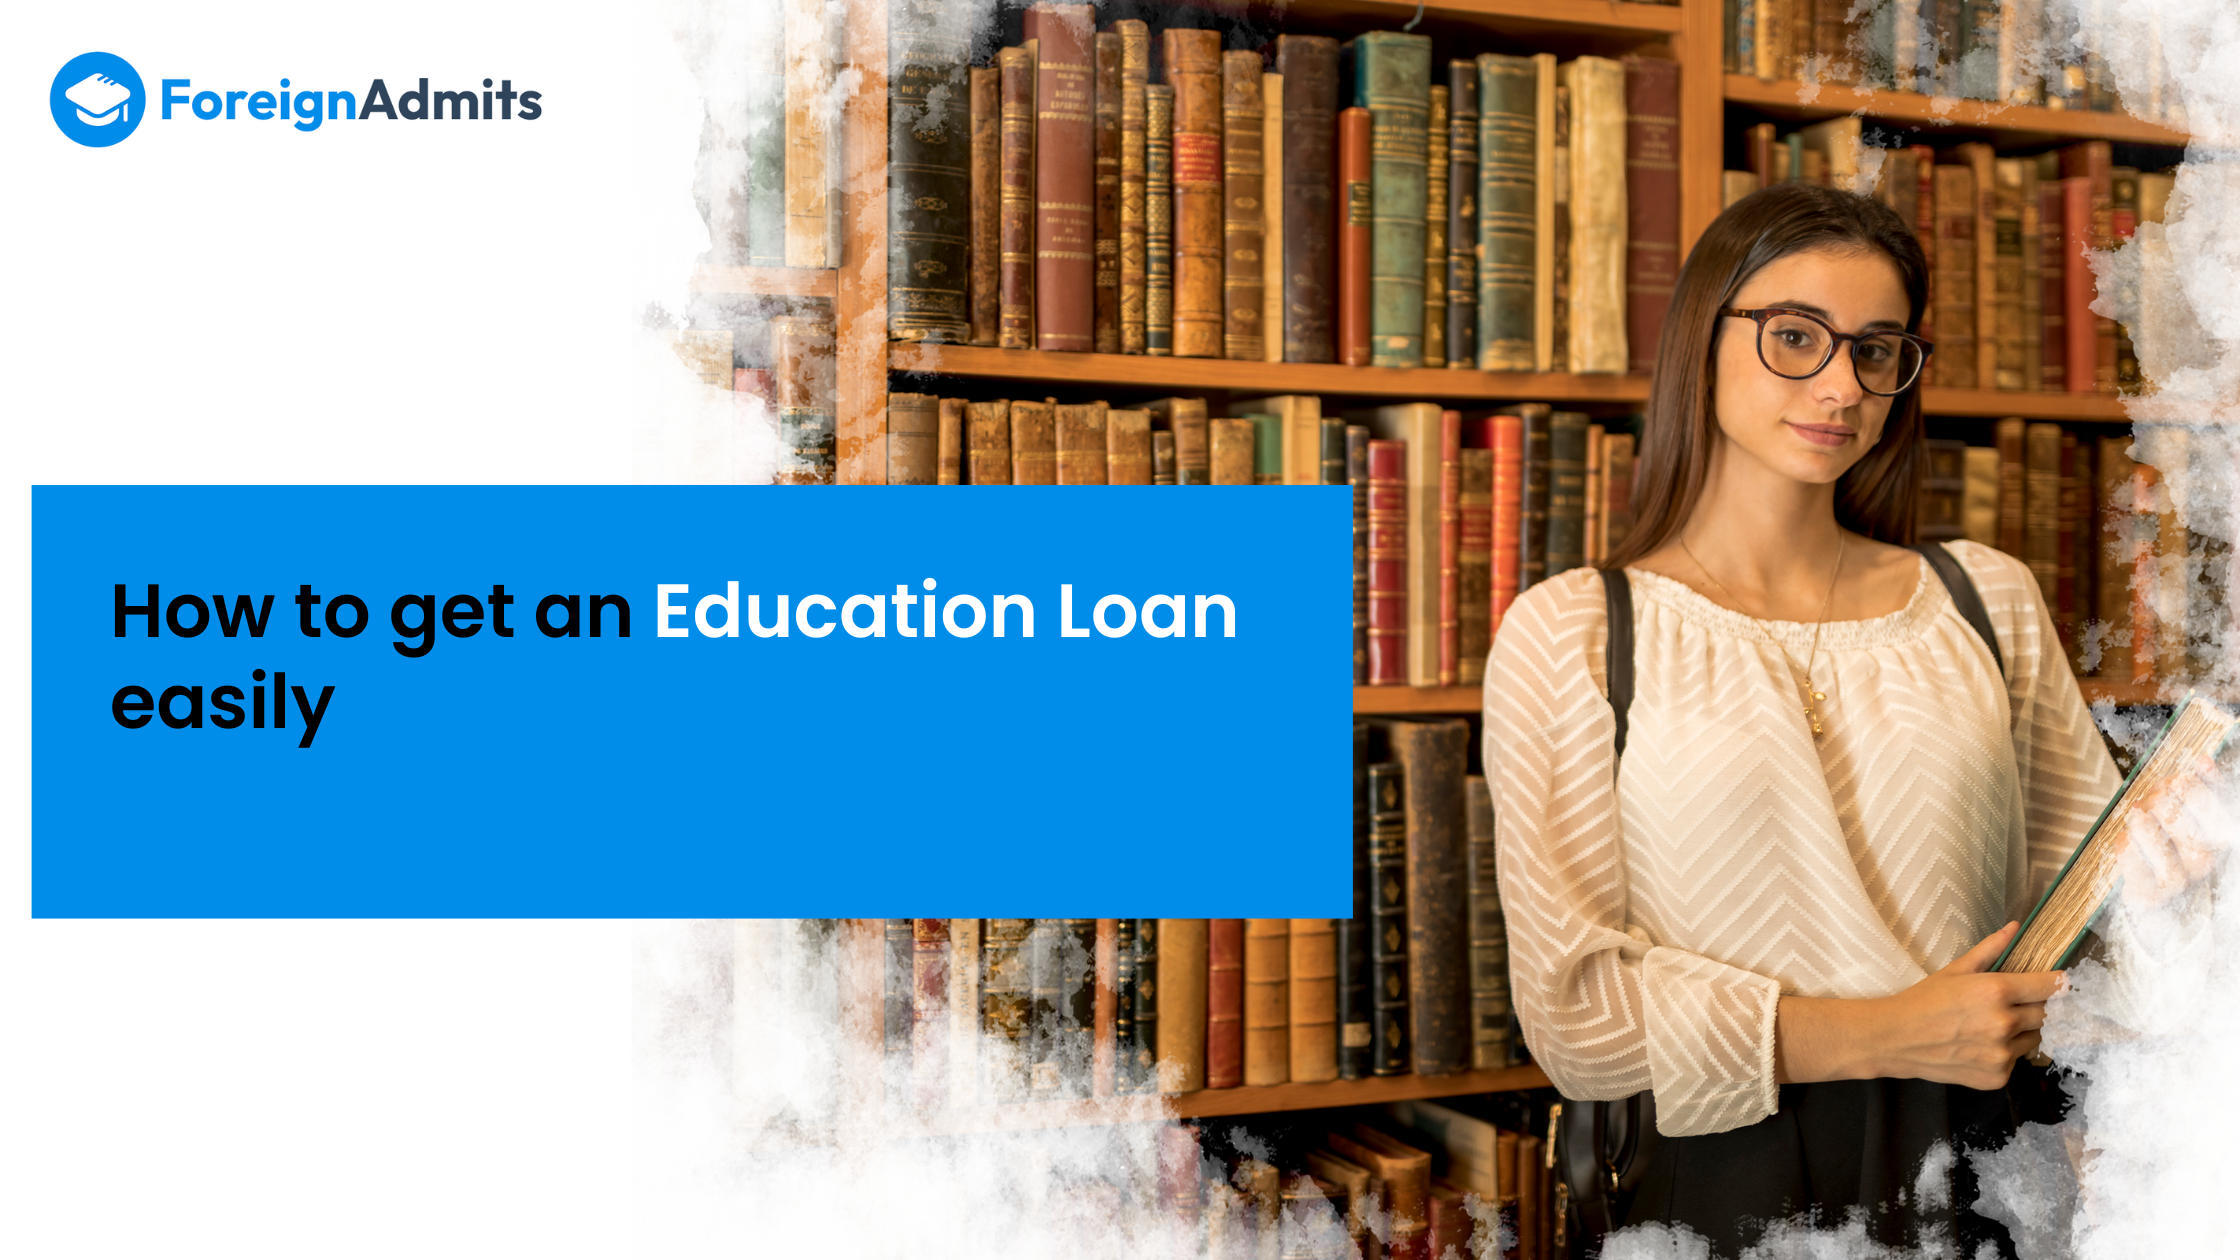 How to get an Education Loan easily